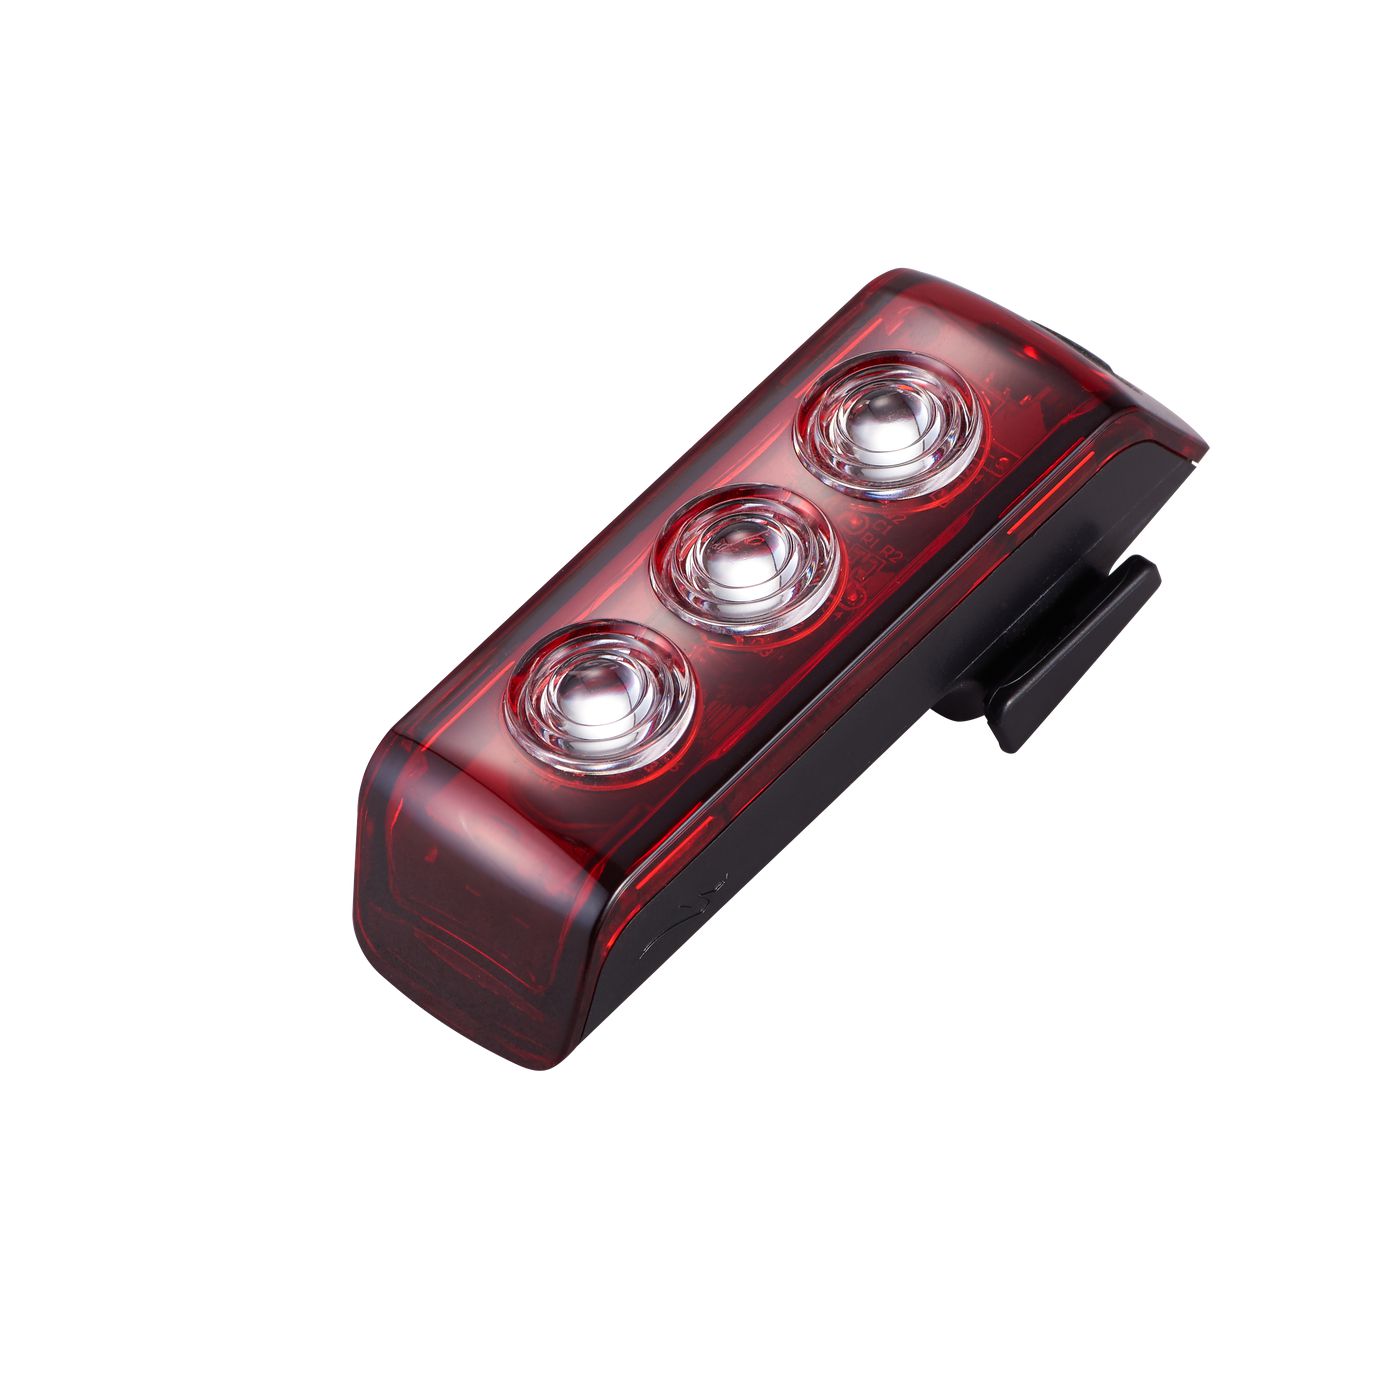 Specialized Flux 250R Rear Bike Light - Lighting - Bicycle Warehouse